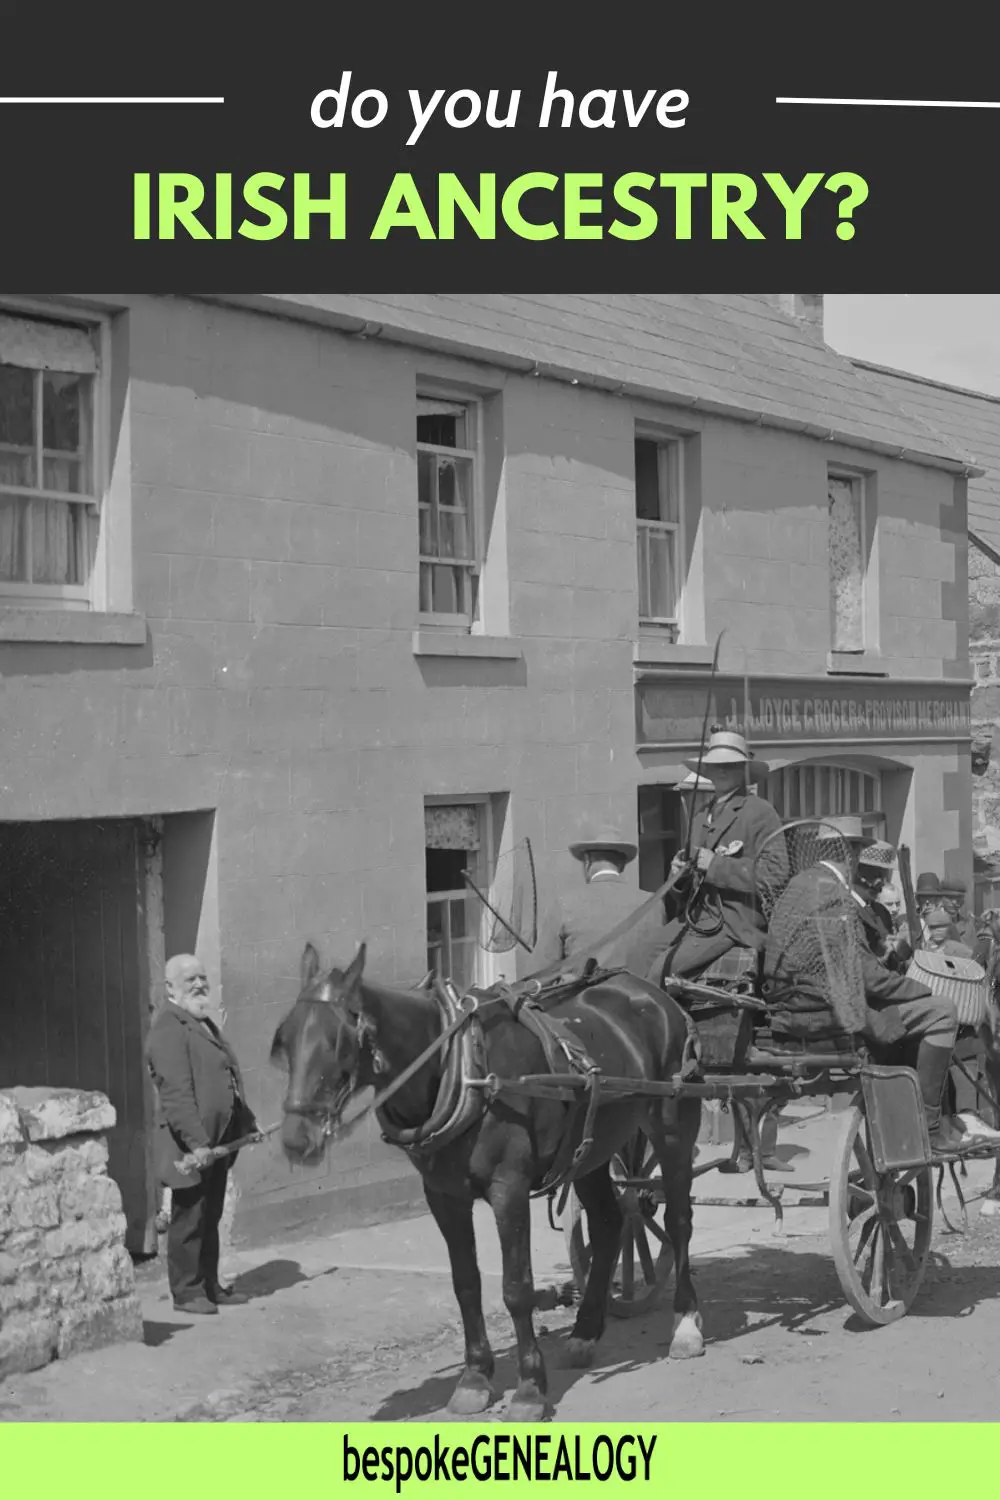 Do you have Irish Ancestry. Vintage photo of people sitting on a cart pulled by a horse in an Irish town.